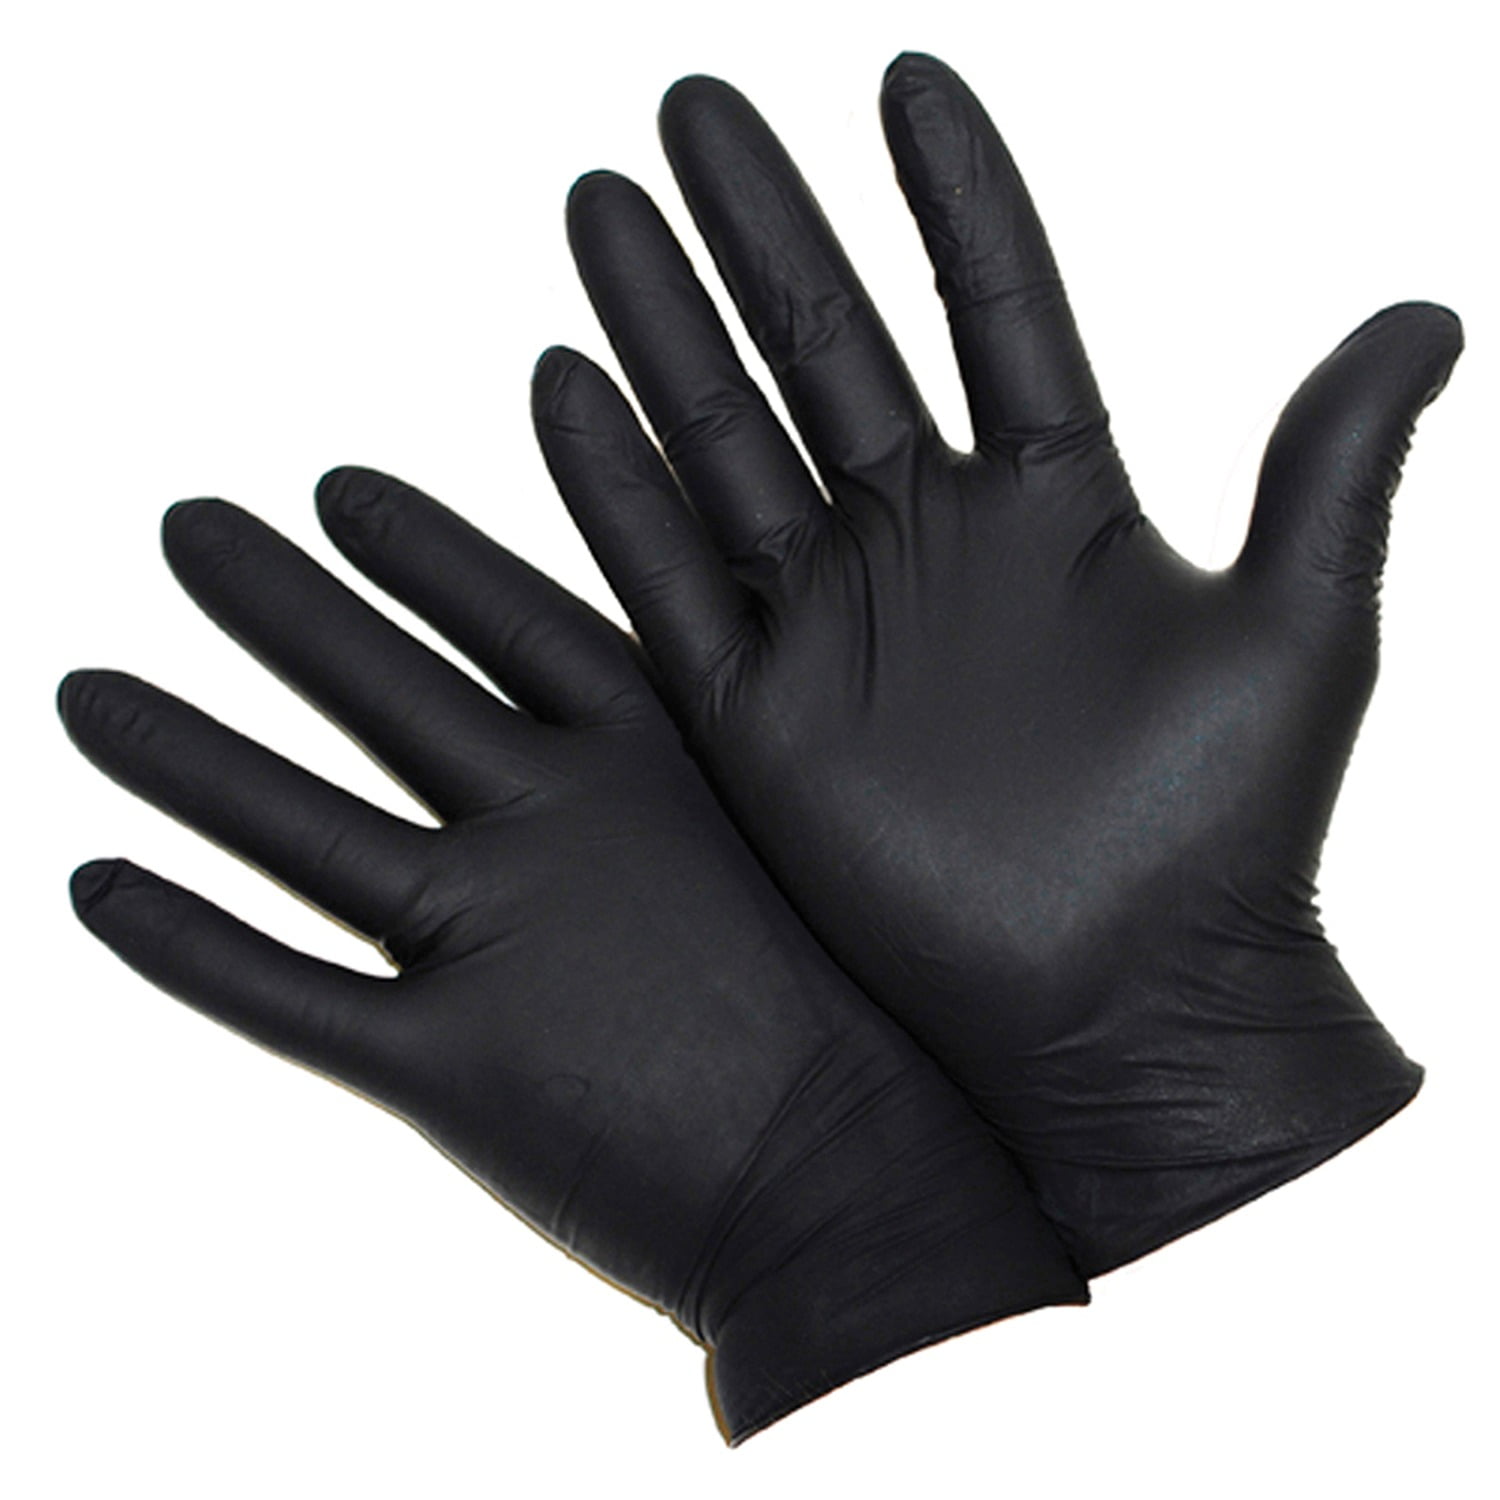 Sysco 4685614 Nitrile Food Service Gloves, 100 Count (Large, Black)